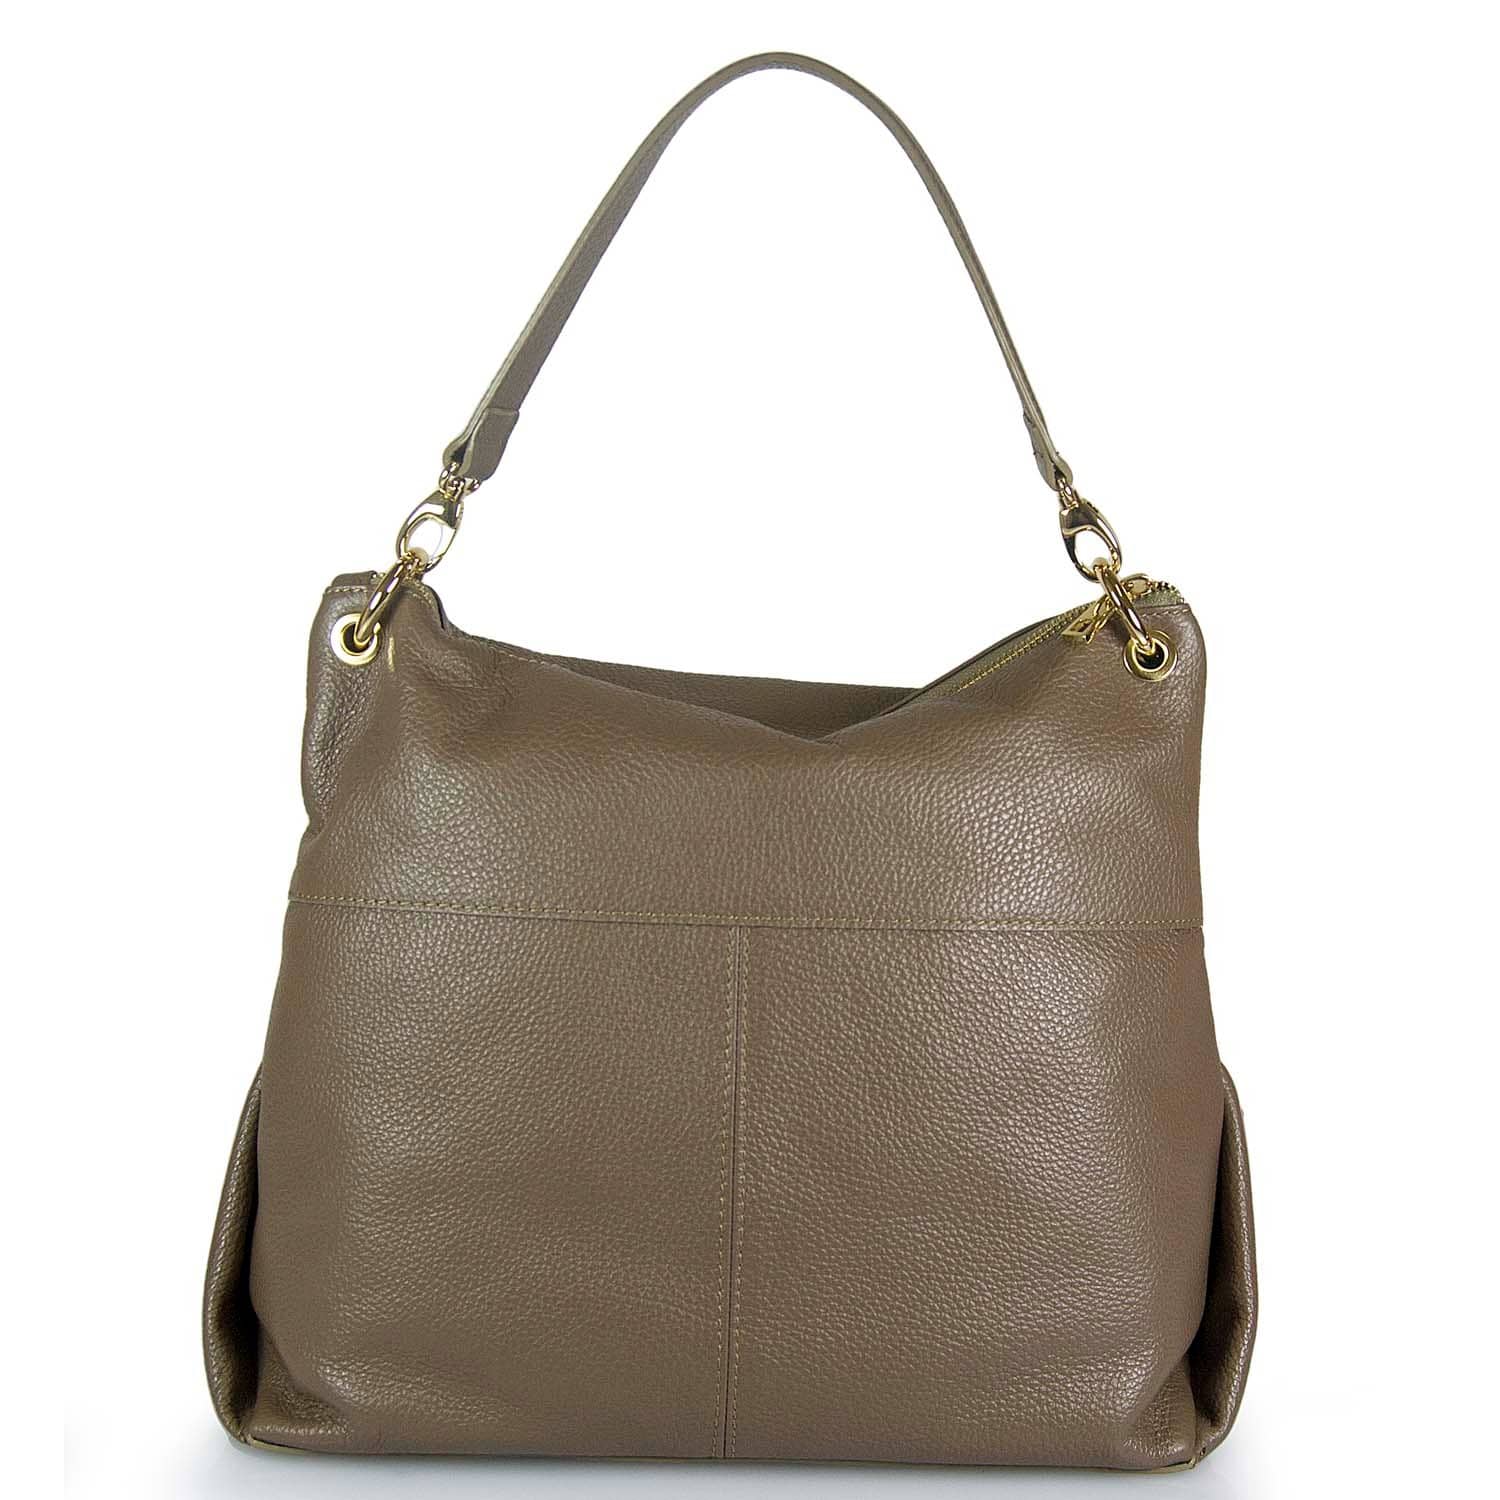 Genuine leather bag. Made in Italy